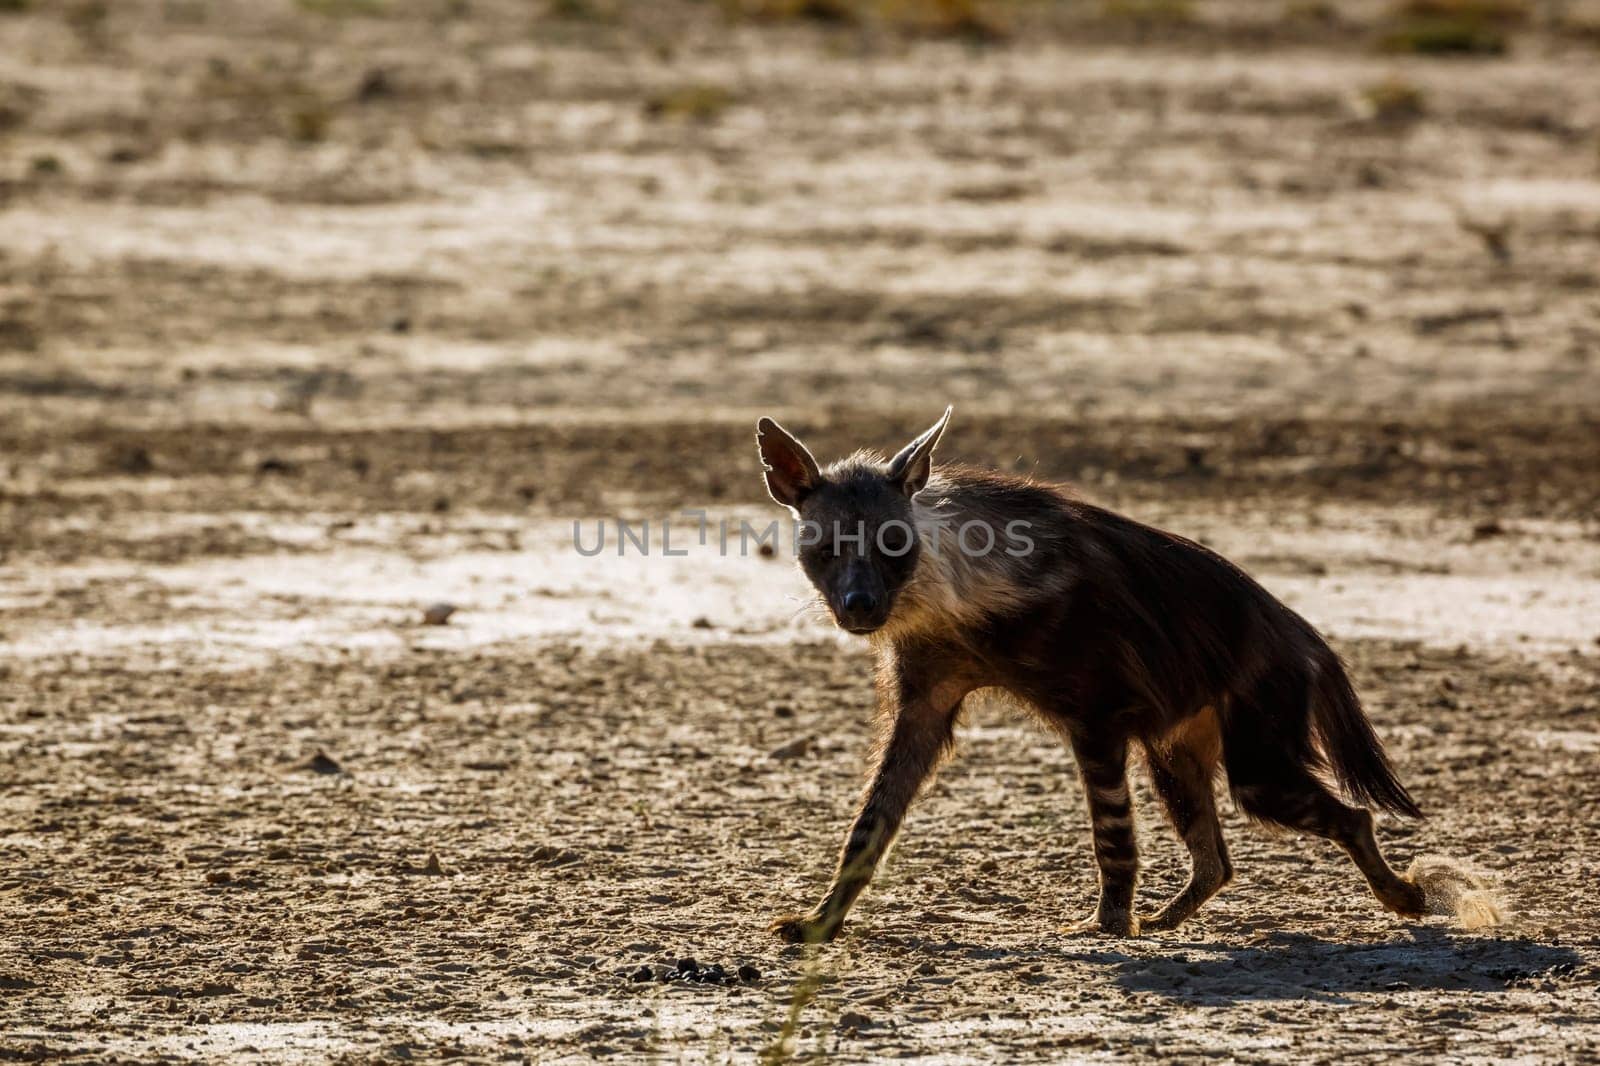 Brown hyena in Kgalagadi transfrontier park, South Africa by PACOCOMO